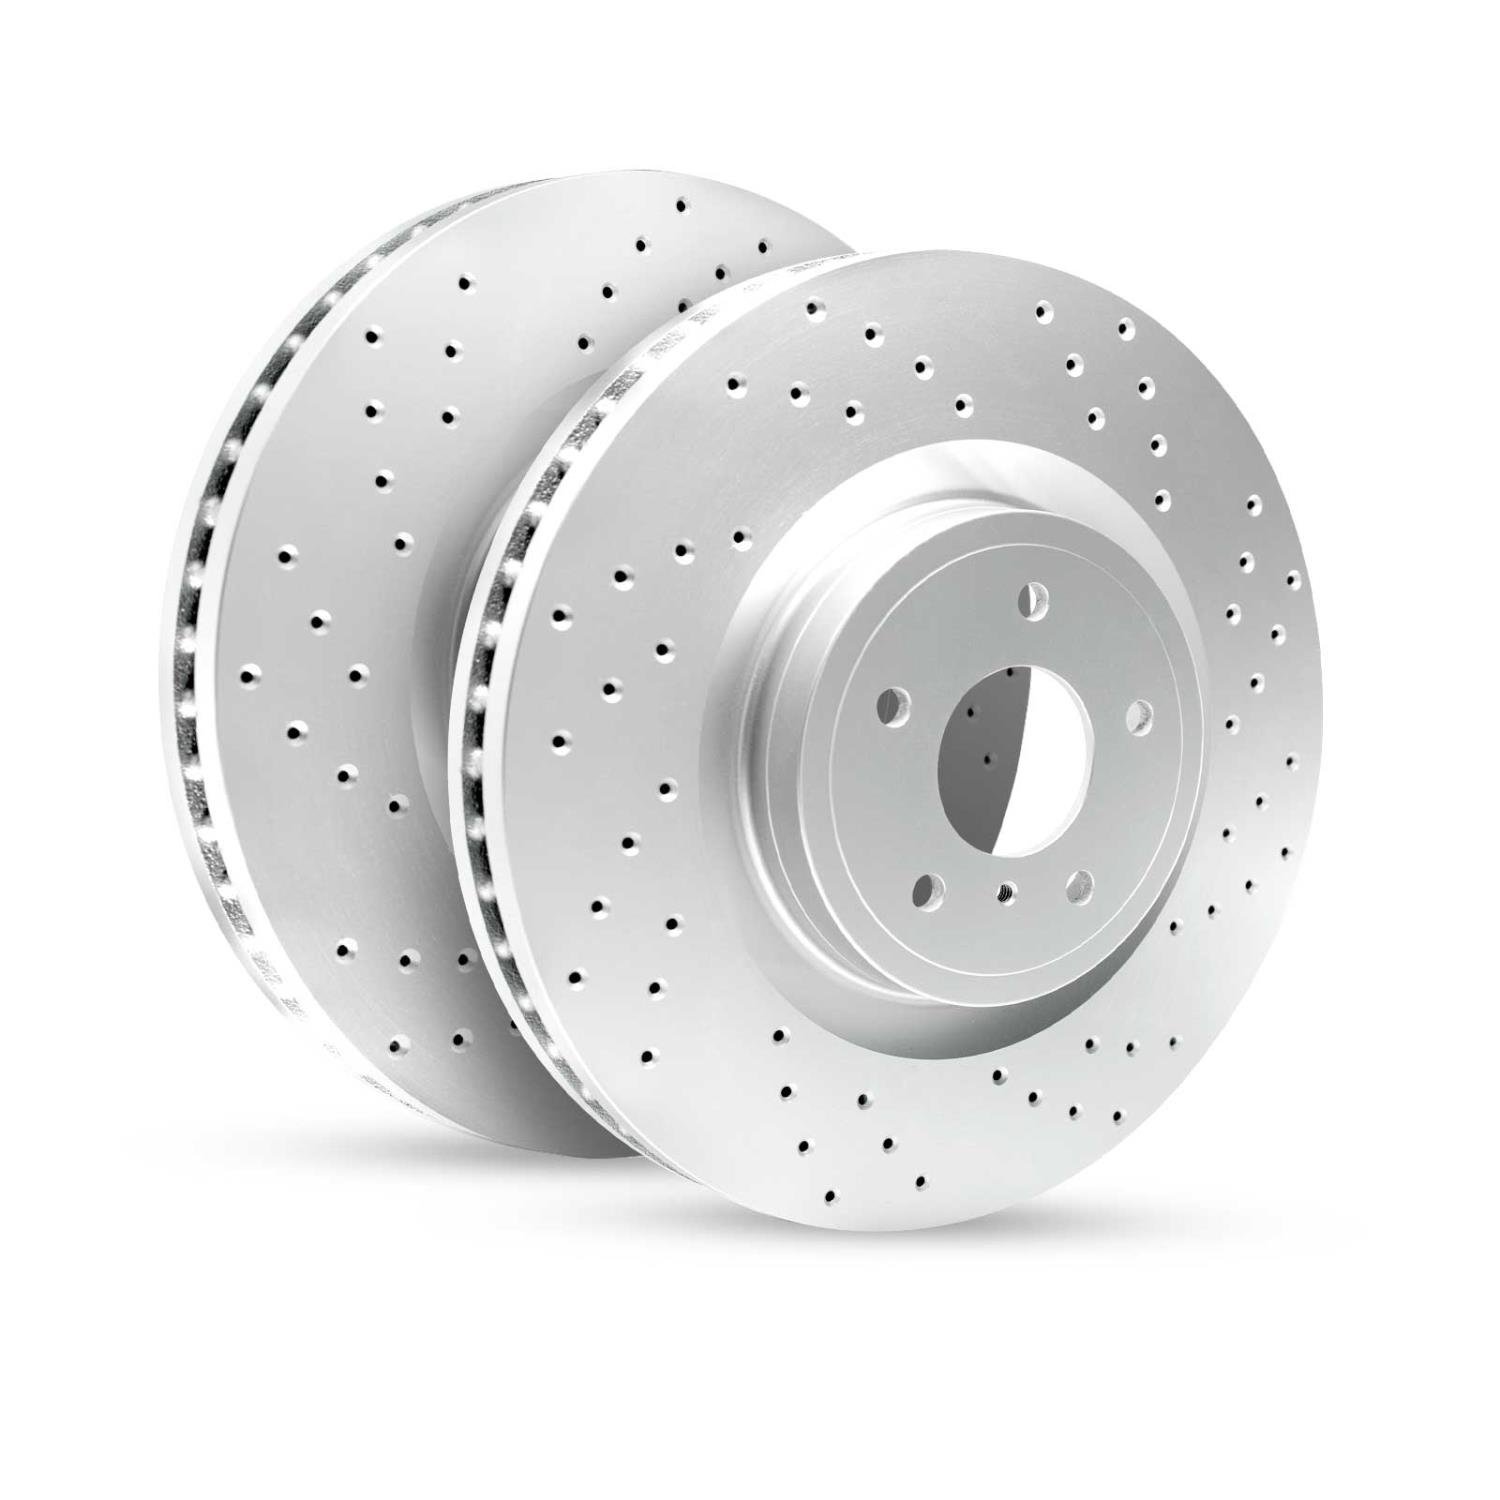 GEO-Carbon Drilled/Slotted Rotors, 2007-2018 Fits Multiple Makes/Models, Position: Front